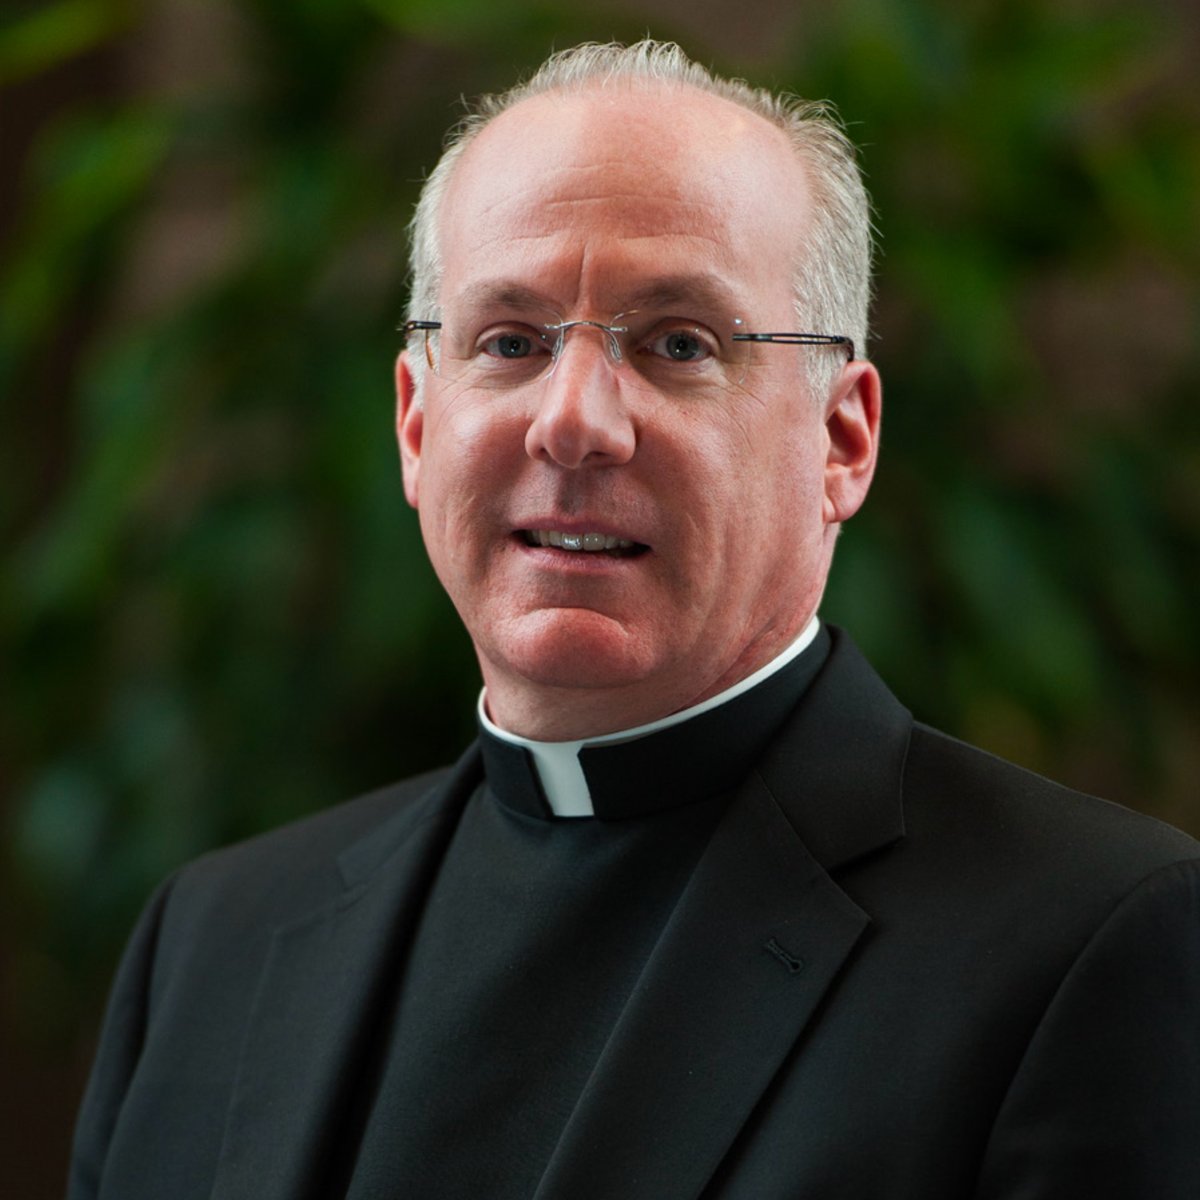 Seton Hall welcomes Monsignor Joseph R. Reilly, S.T.L., Ph.D., as our 22nd president. A testament to our enduring values and mission, he leads us into a future filled with faith, excellence, and innovation. Read more: shu.edu/news/monsignor…